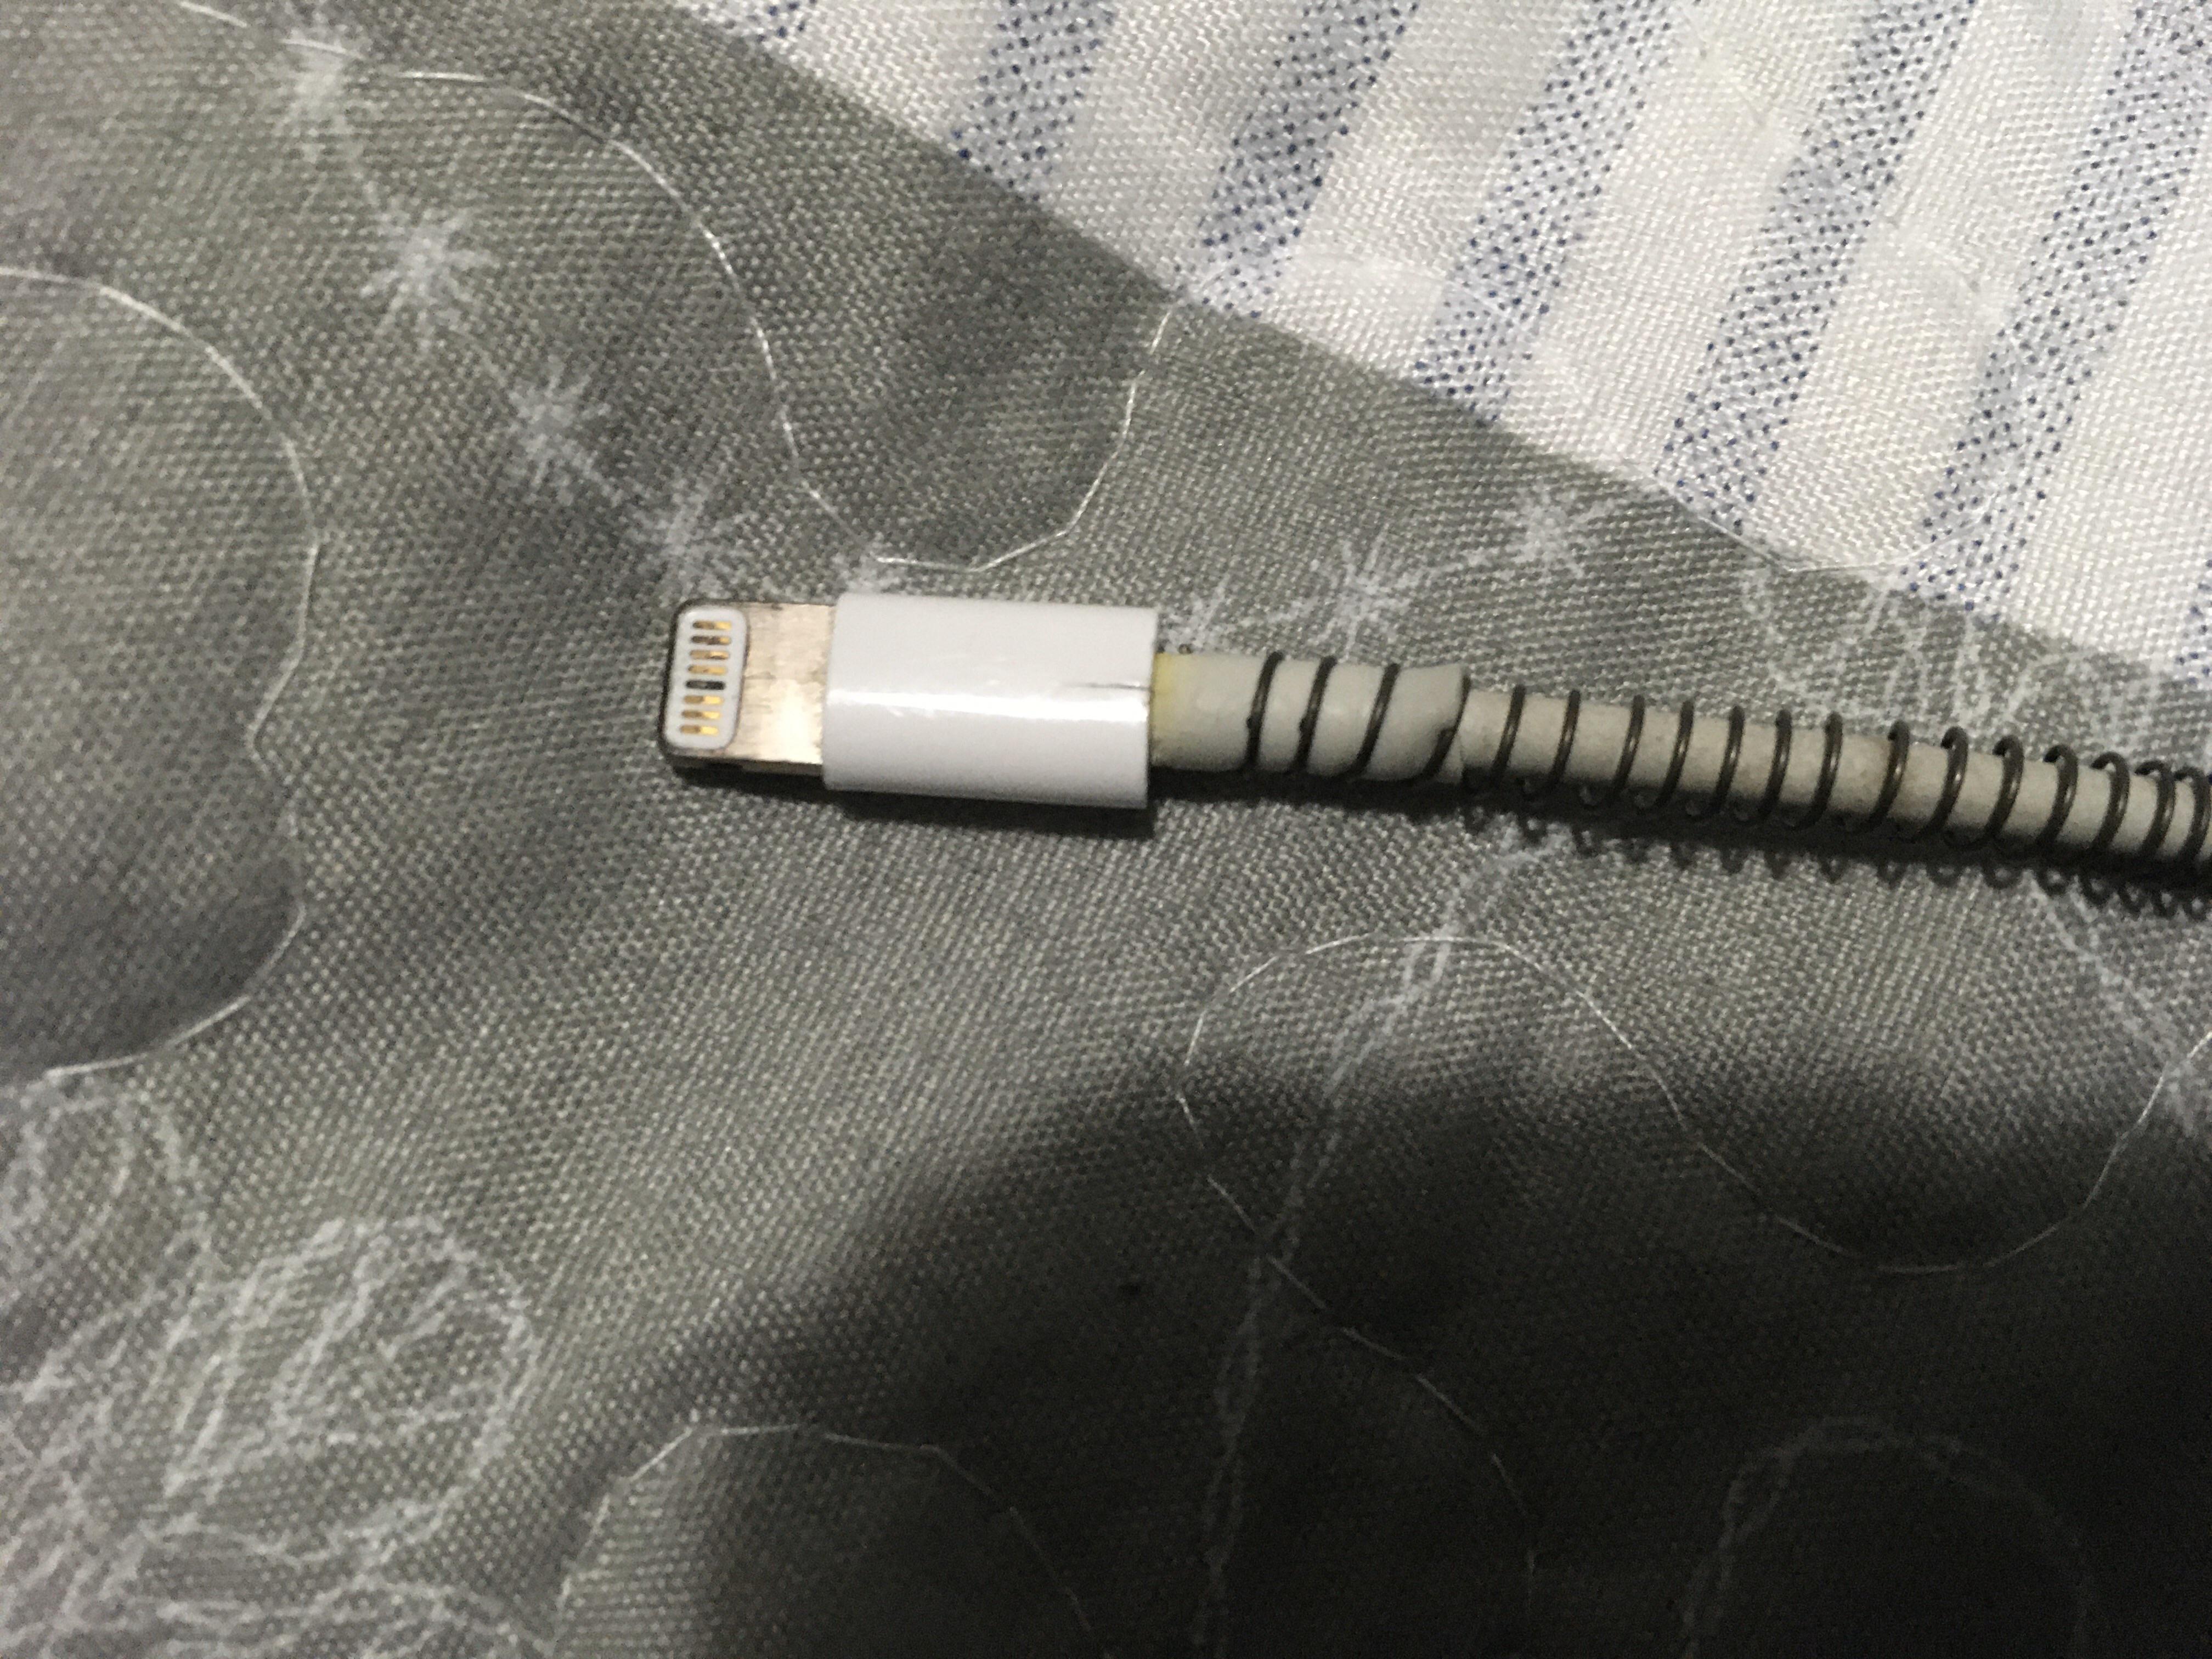 Check for any physical damage or fraying on the charger and cable.
Ensure that the USB-C connector is clean and free from debris.